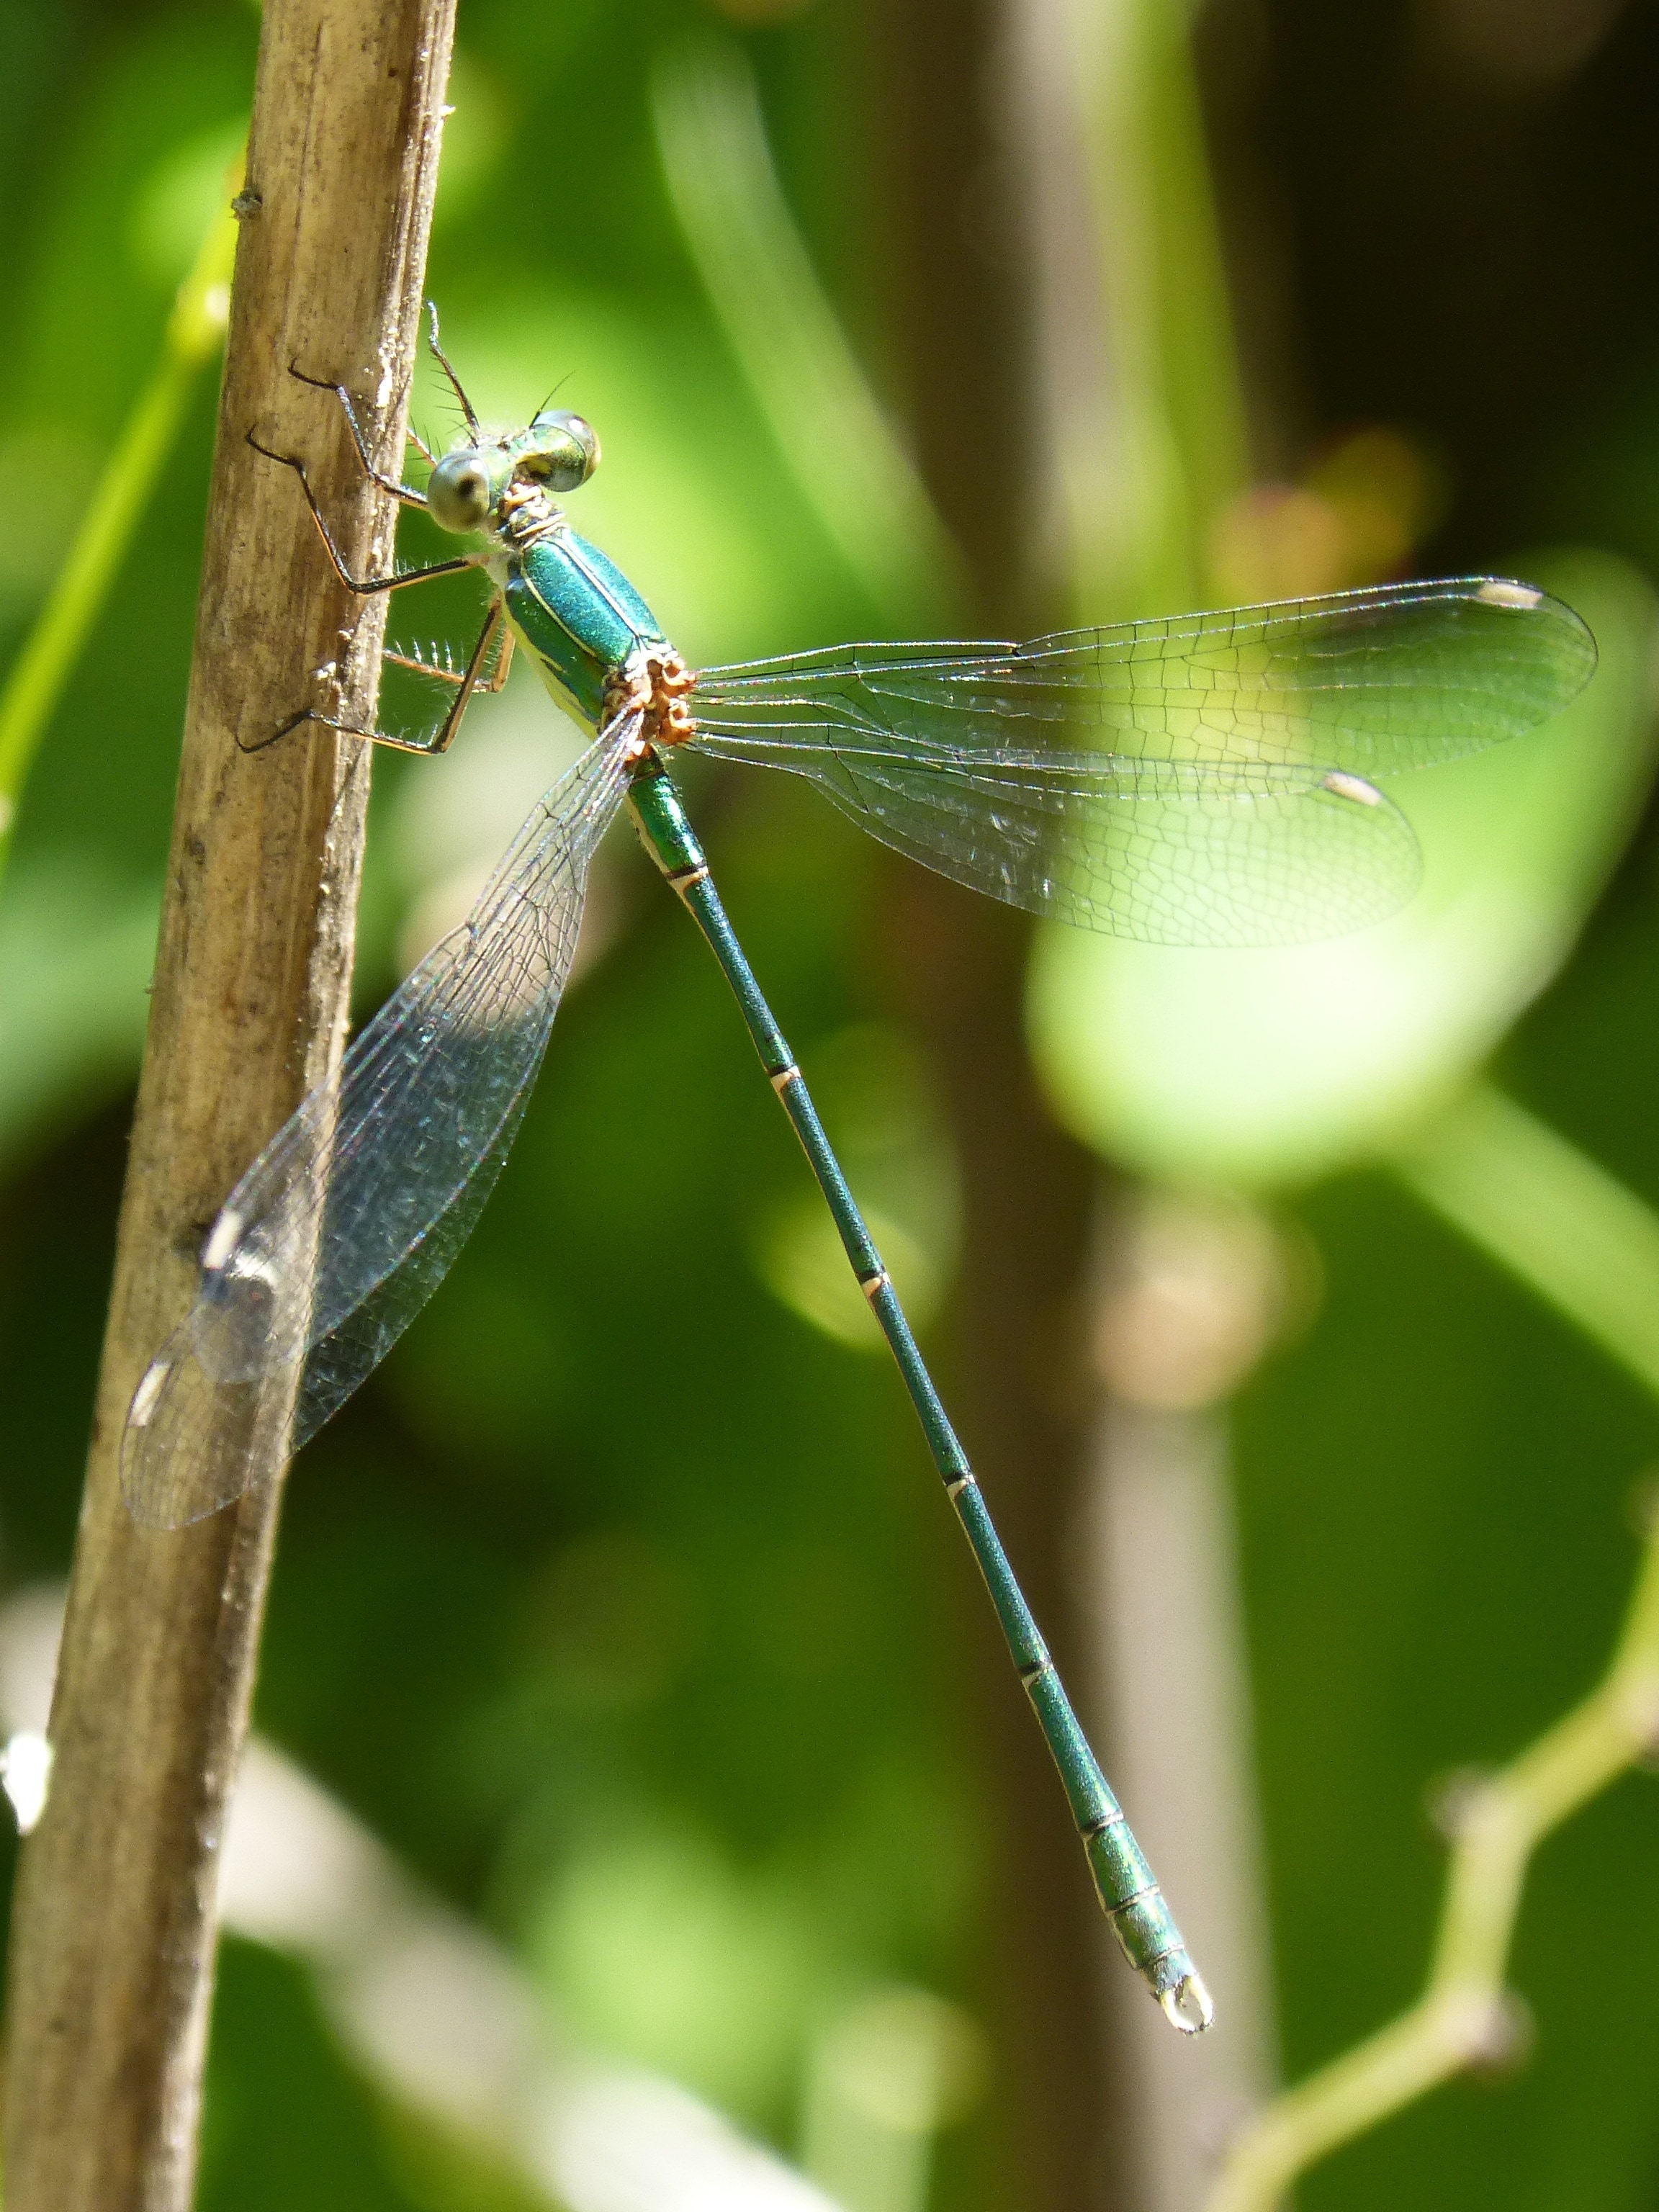 Green Dragonfly, Winged Insect, Pond, green color, one animal